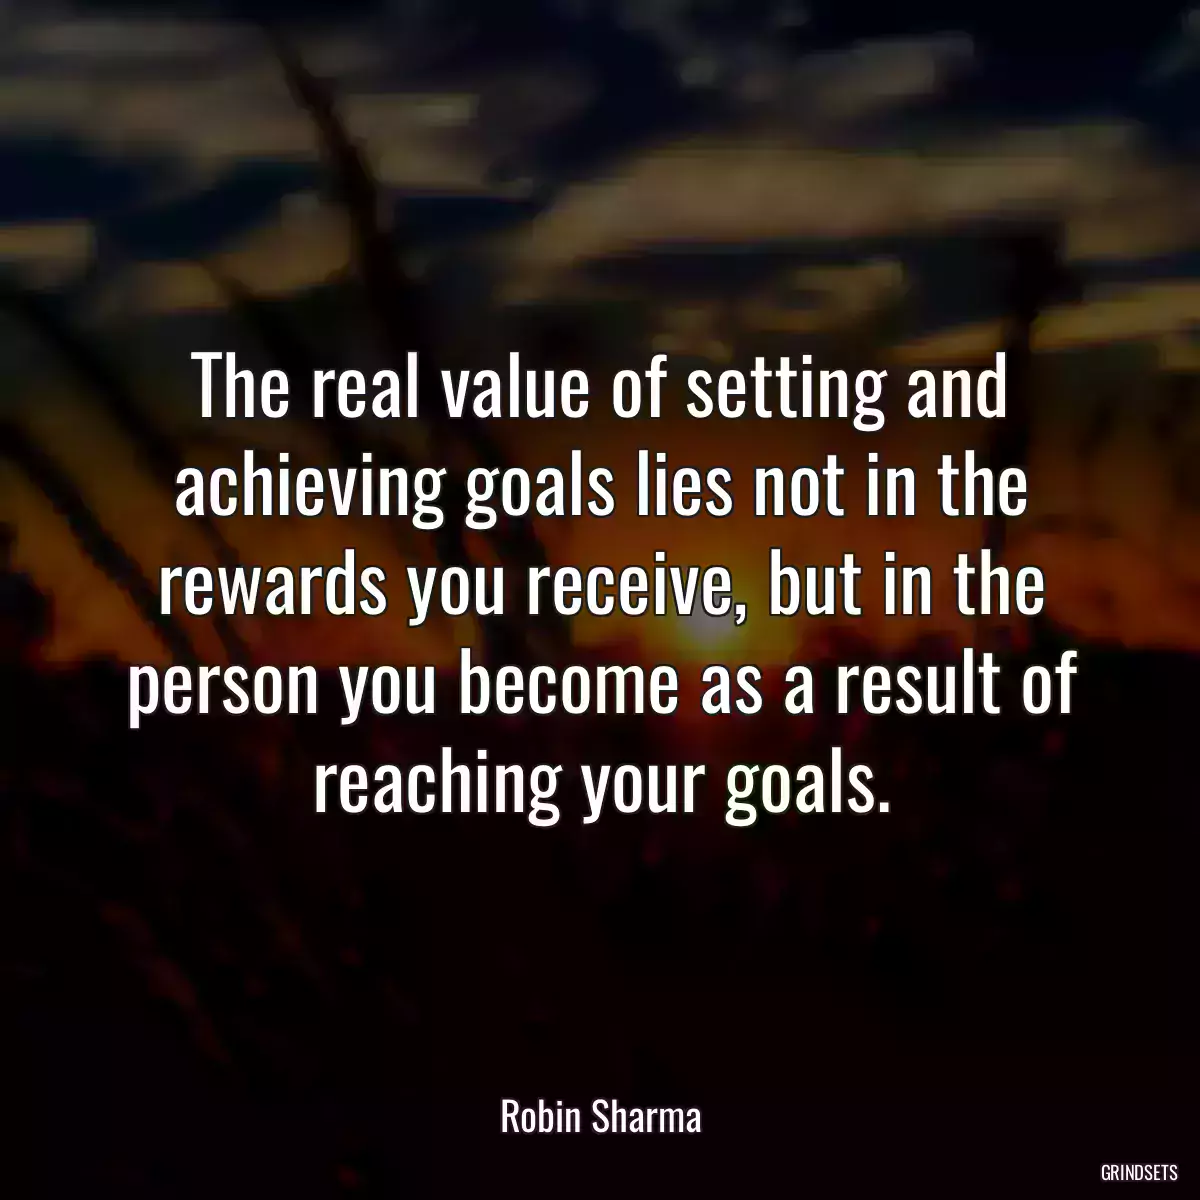 The real value of setting and achieving goals lies not in the rewards you receive, but in the person you become as a result of reaching your goals.